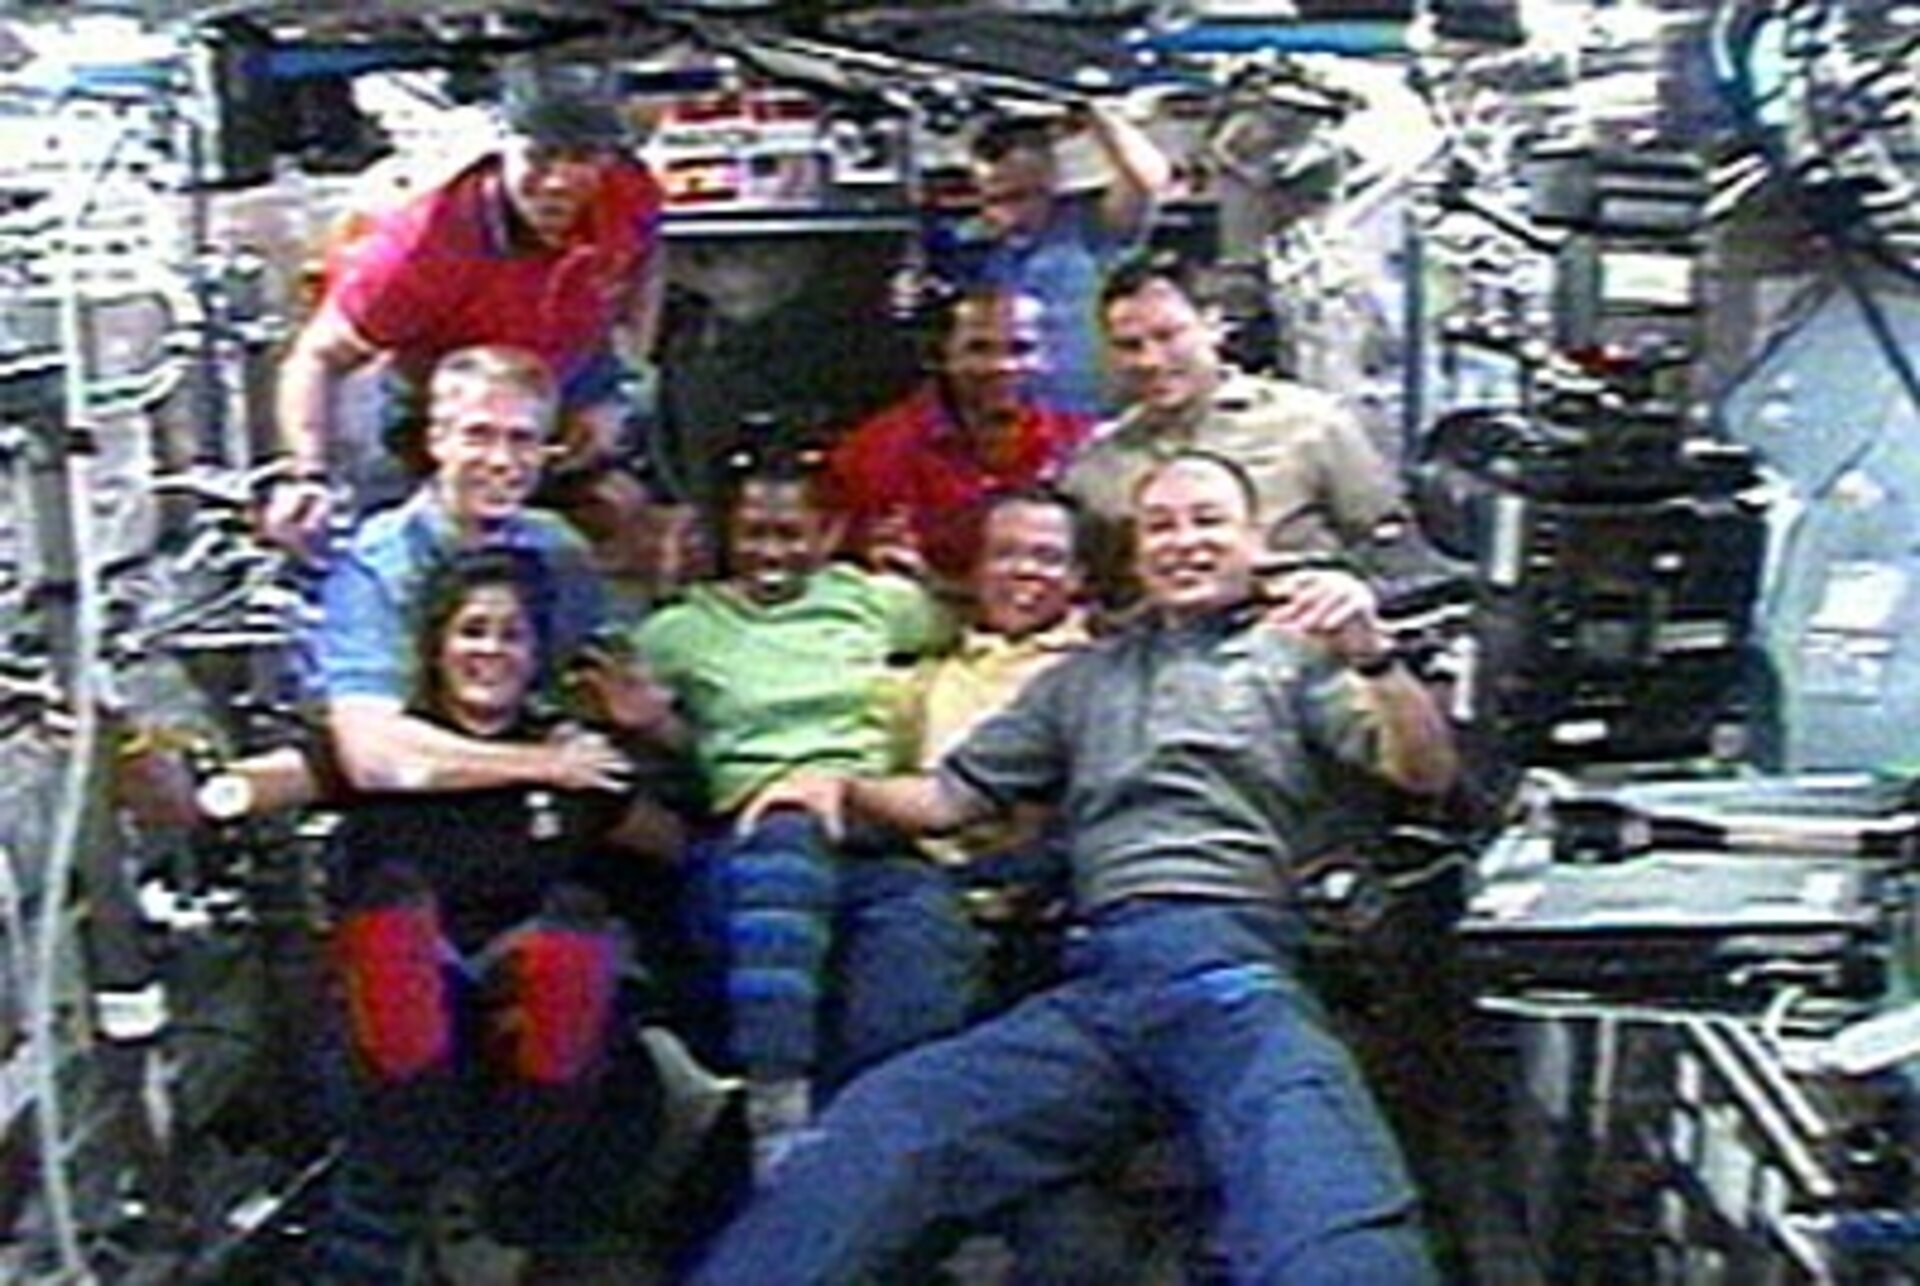 The Expedition 14 and STS-116 crews inside ISS shortly after hatch opening